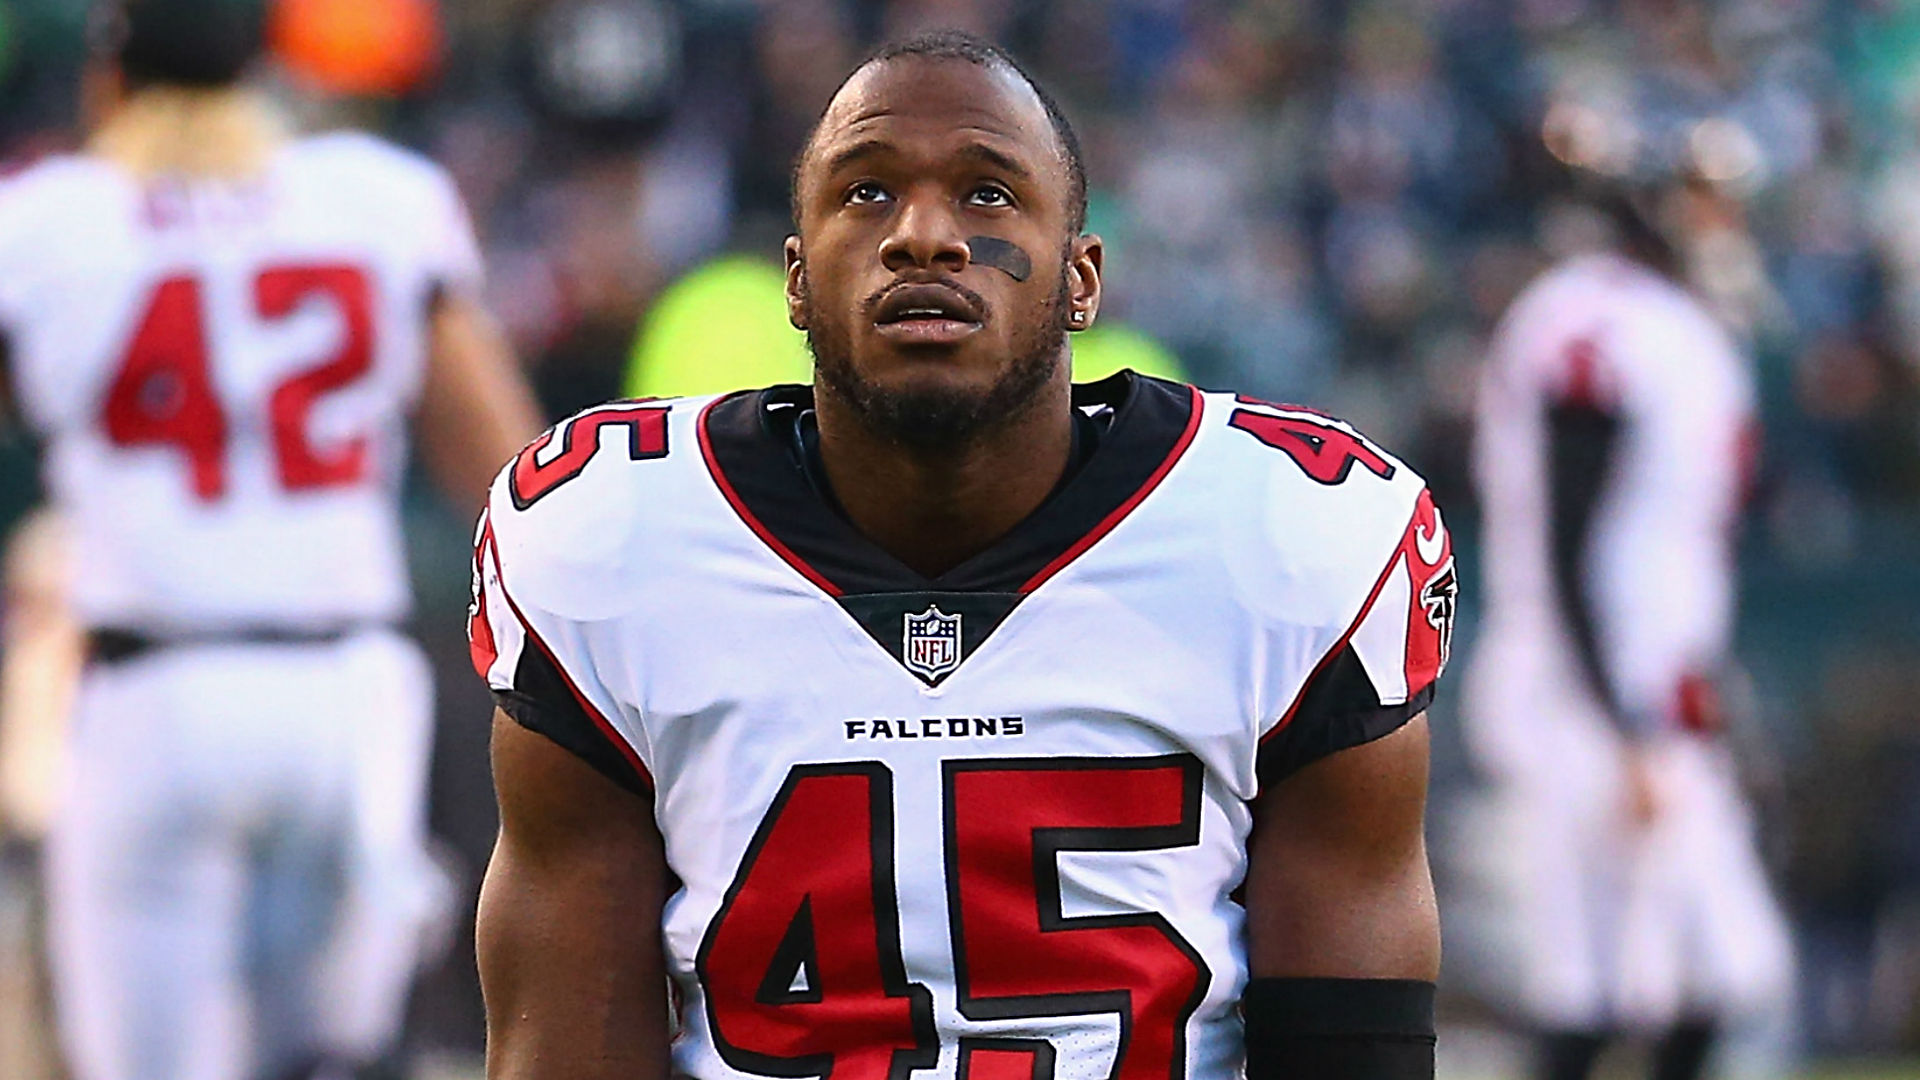 The Atlanta Falcons have another key piece of their defense locked down following Deion Jones' renewal.